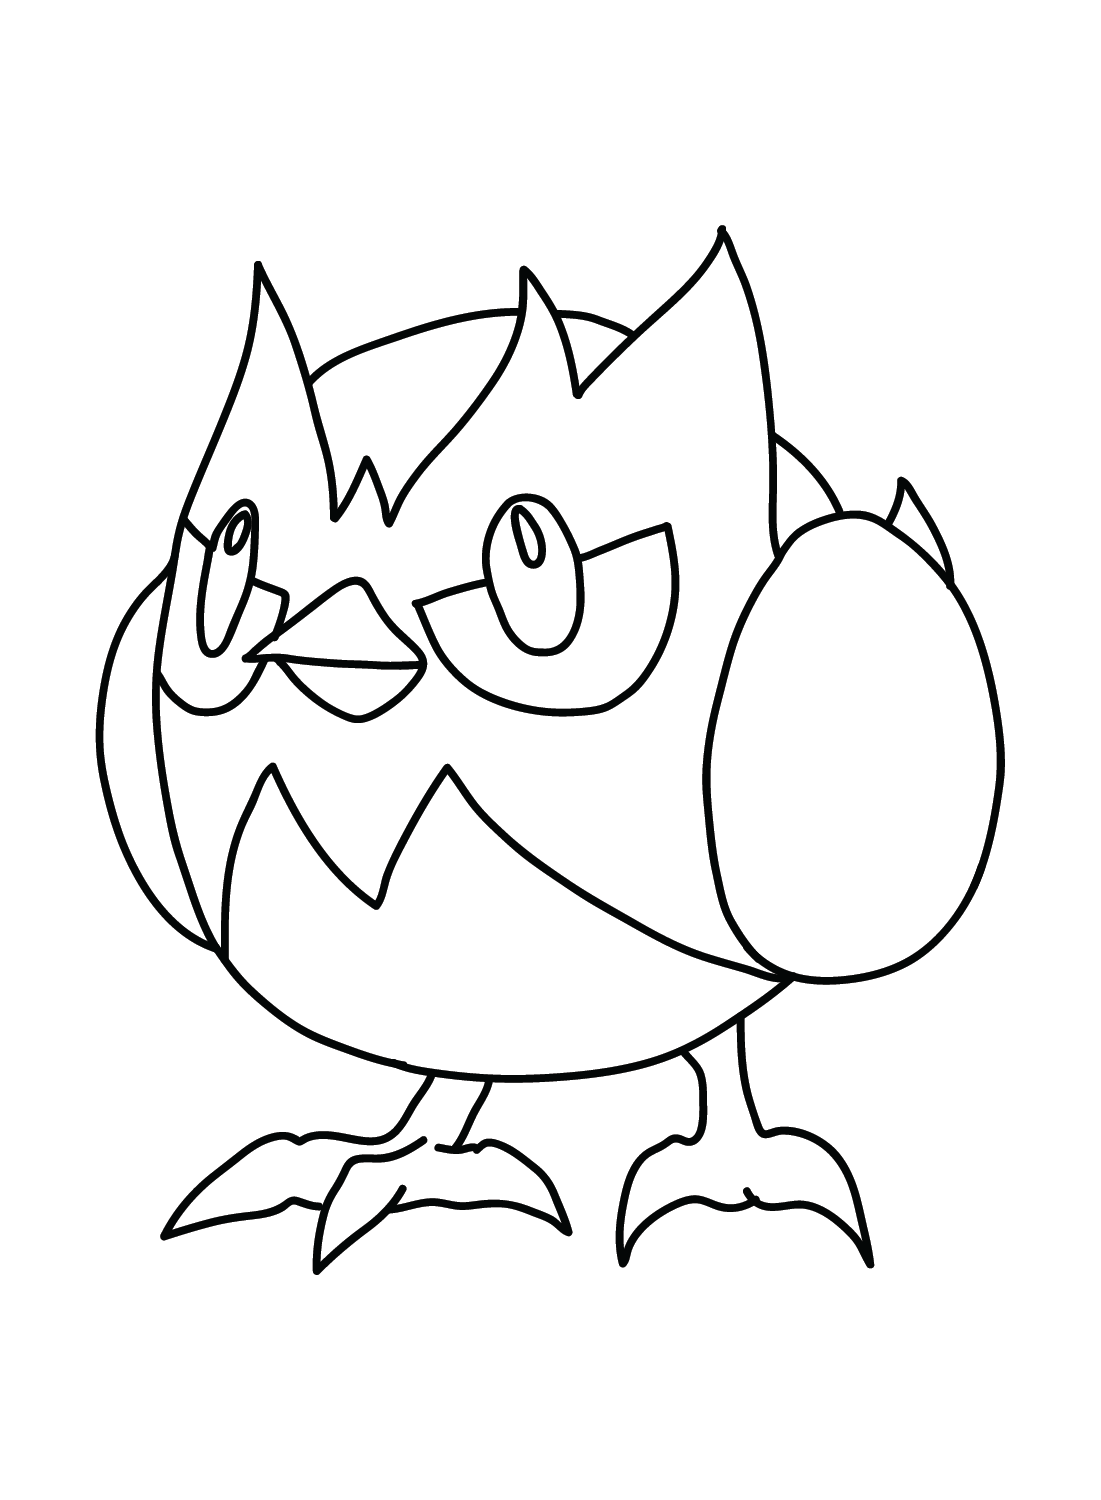 The Rookidee Pokemon Coloring Page